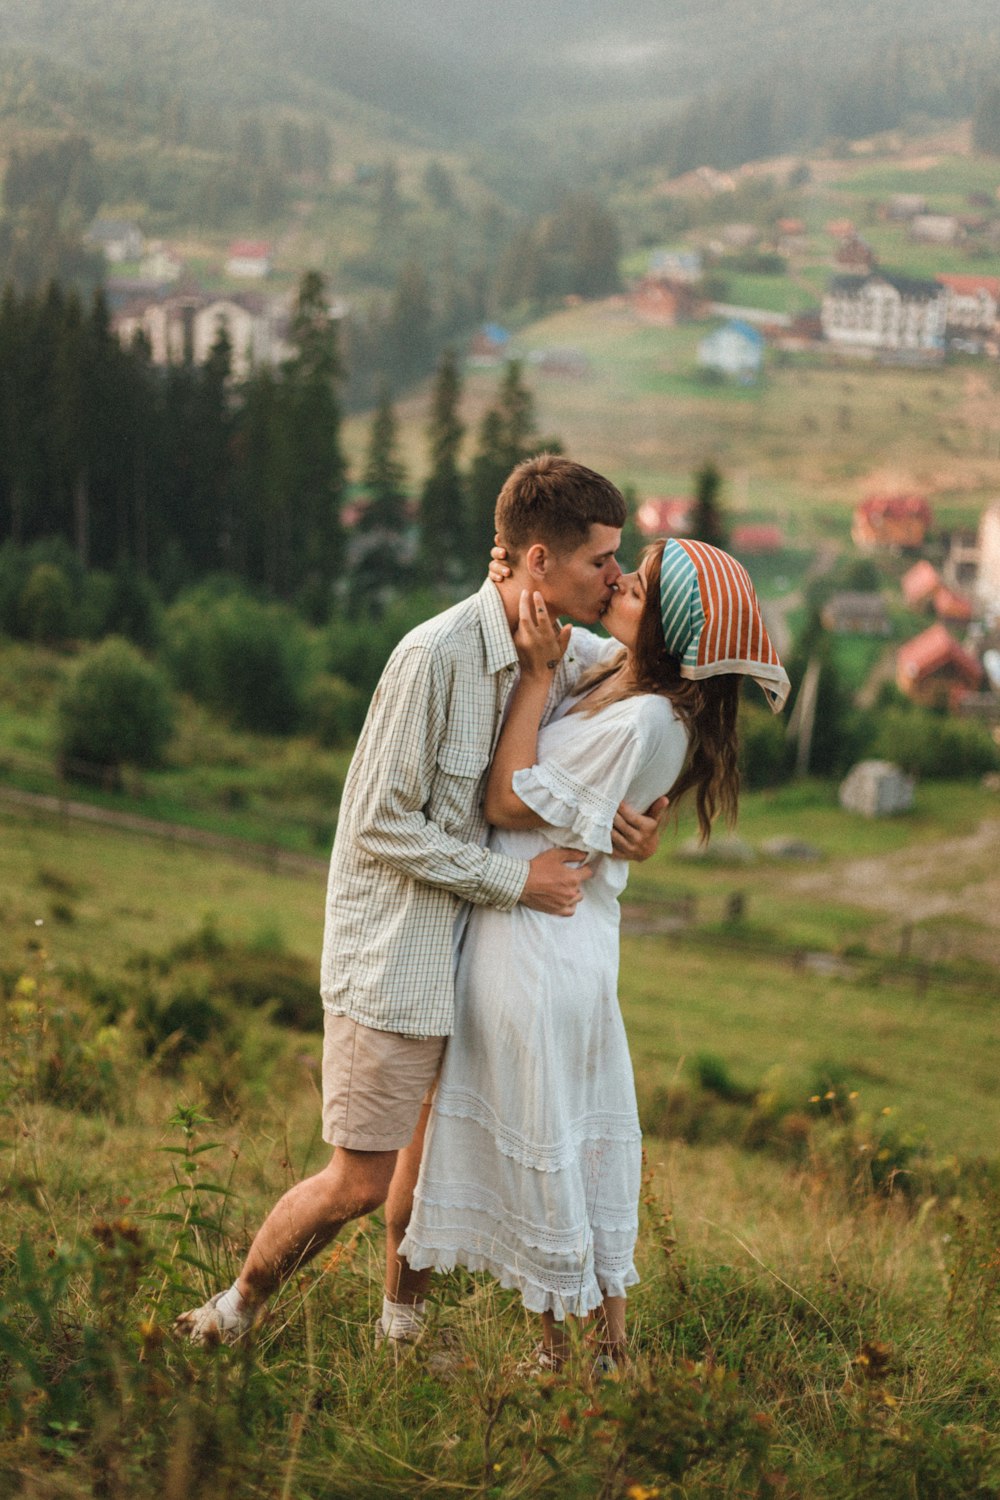 man in white dress shirt kissing woman in white dress on green grass field during daytime